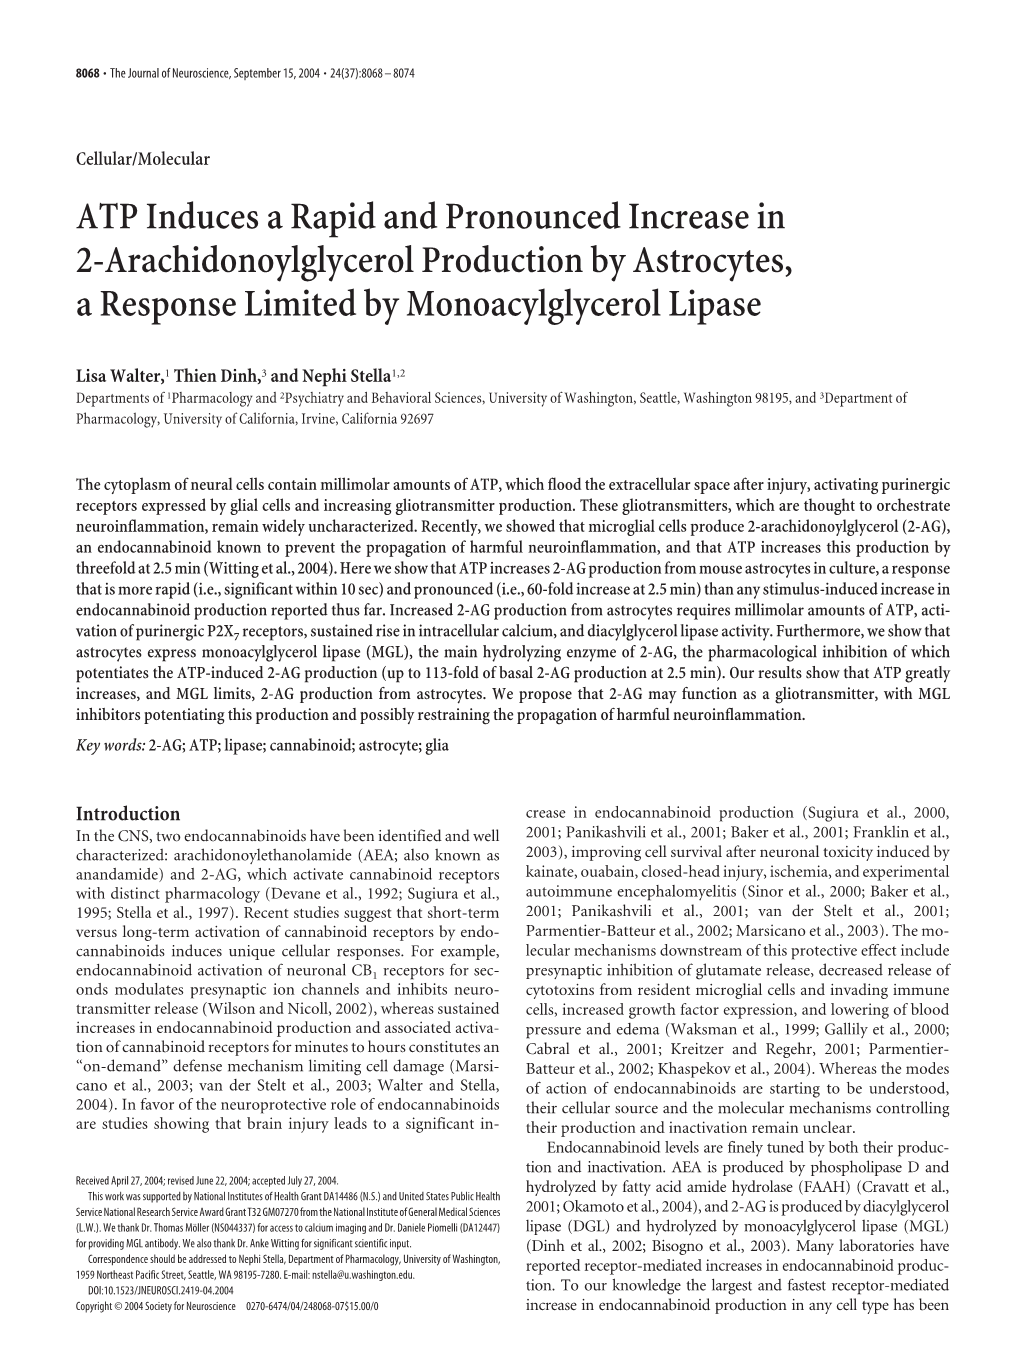 ATP Induces a Rapid and Pronounced Increase in 2-Arachidonoylglycerol Production by Astrocytes, a Response Limited by Monoacylglycerol Lipase